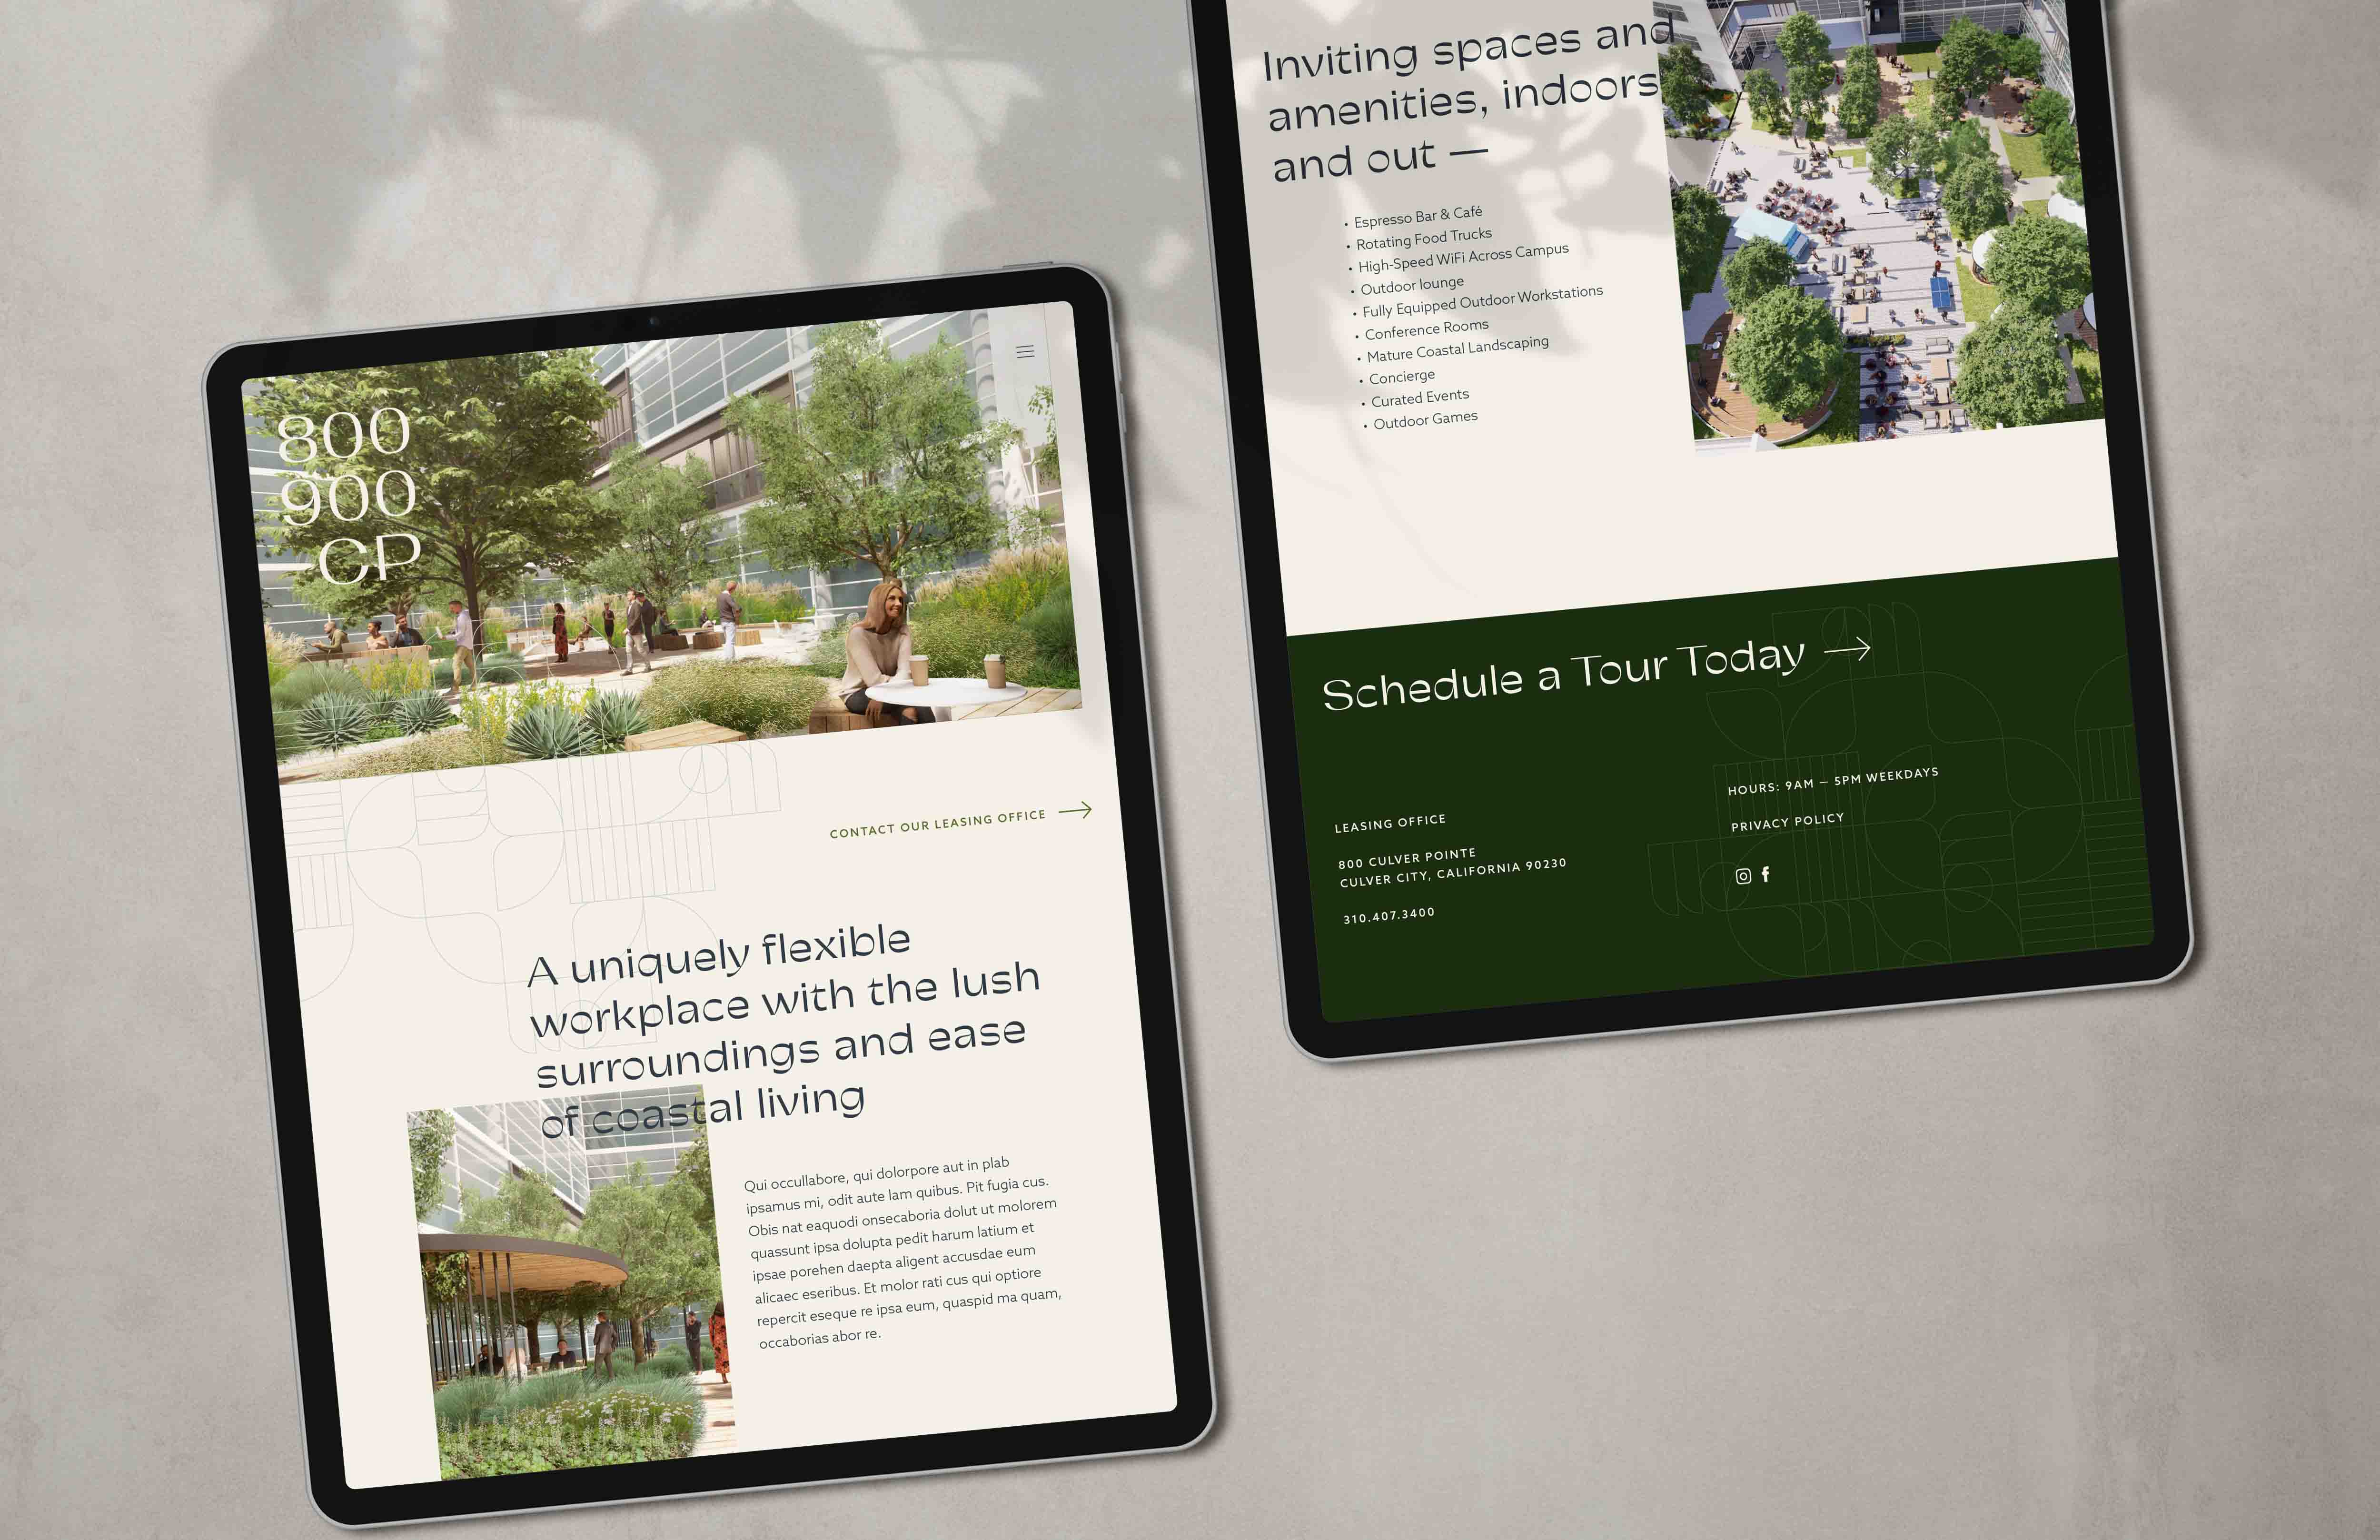 Mockup of 800-900 Culver Pointe website pages on iPad, with logo, text, and imagery representing the brand identity